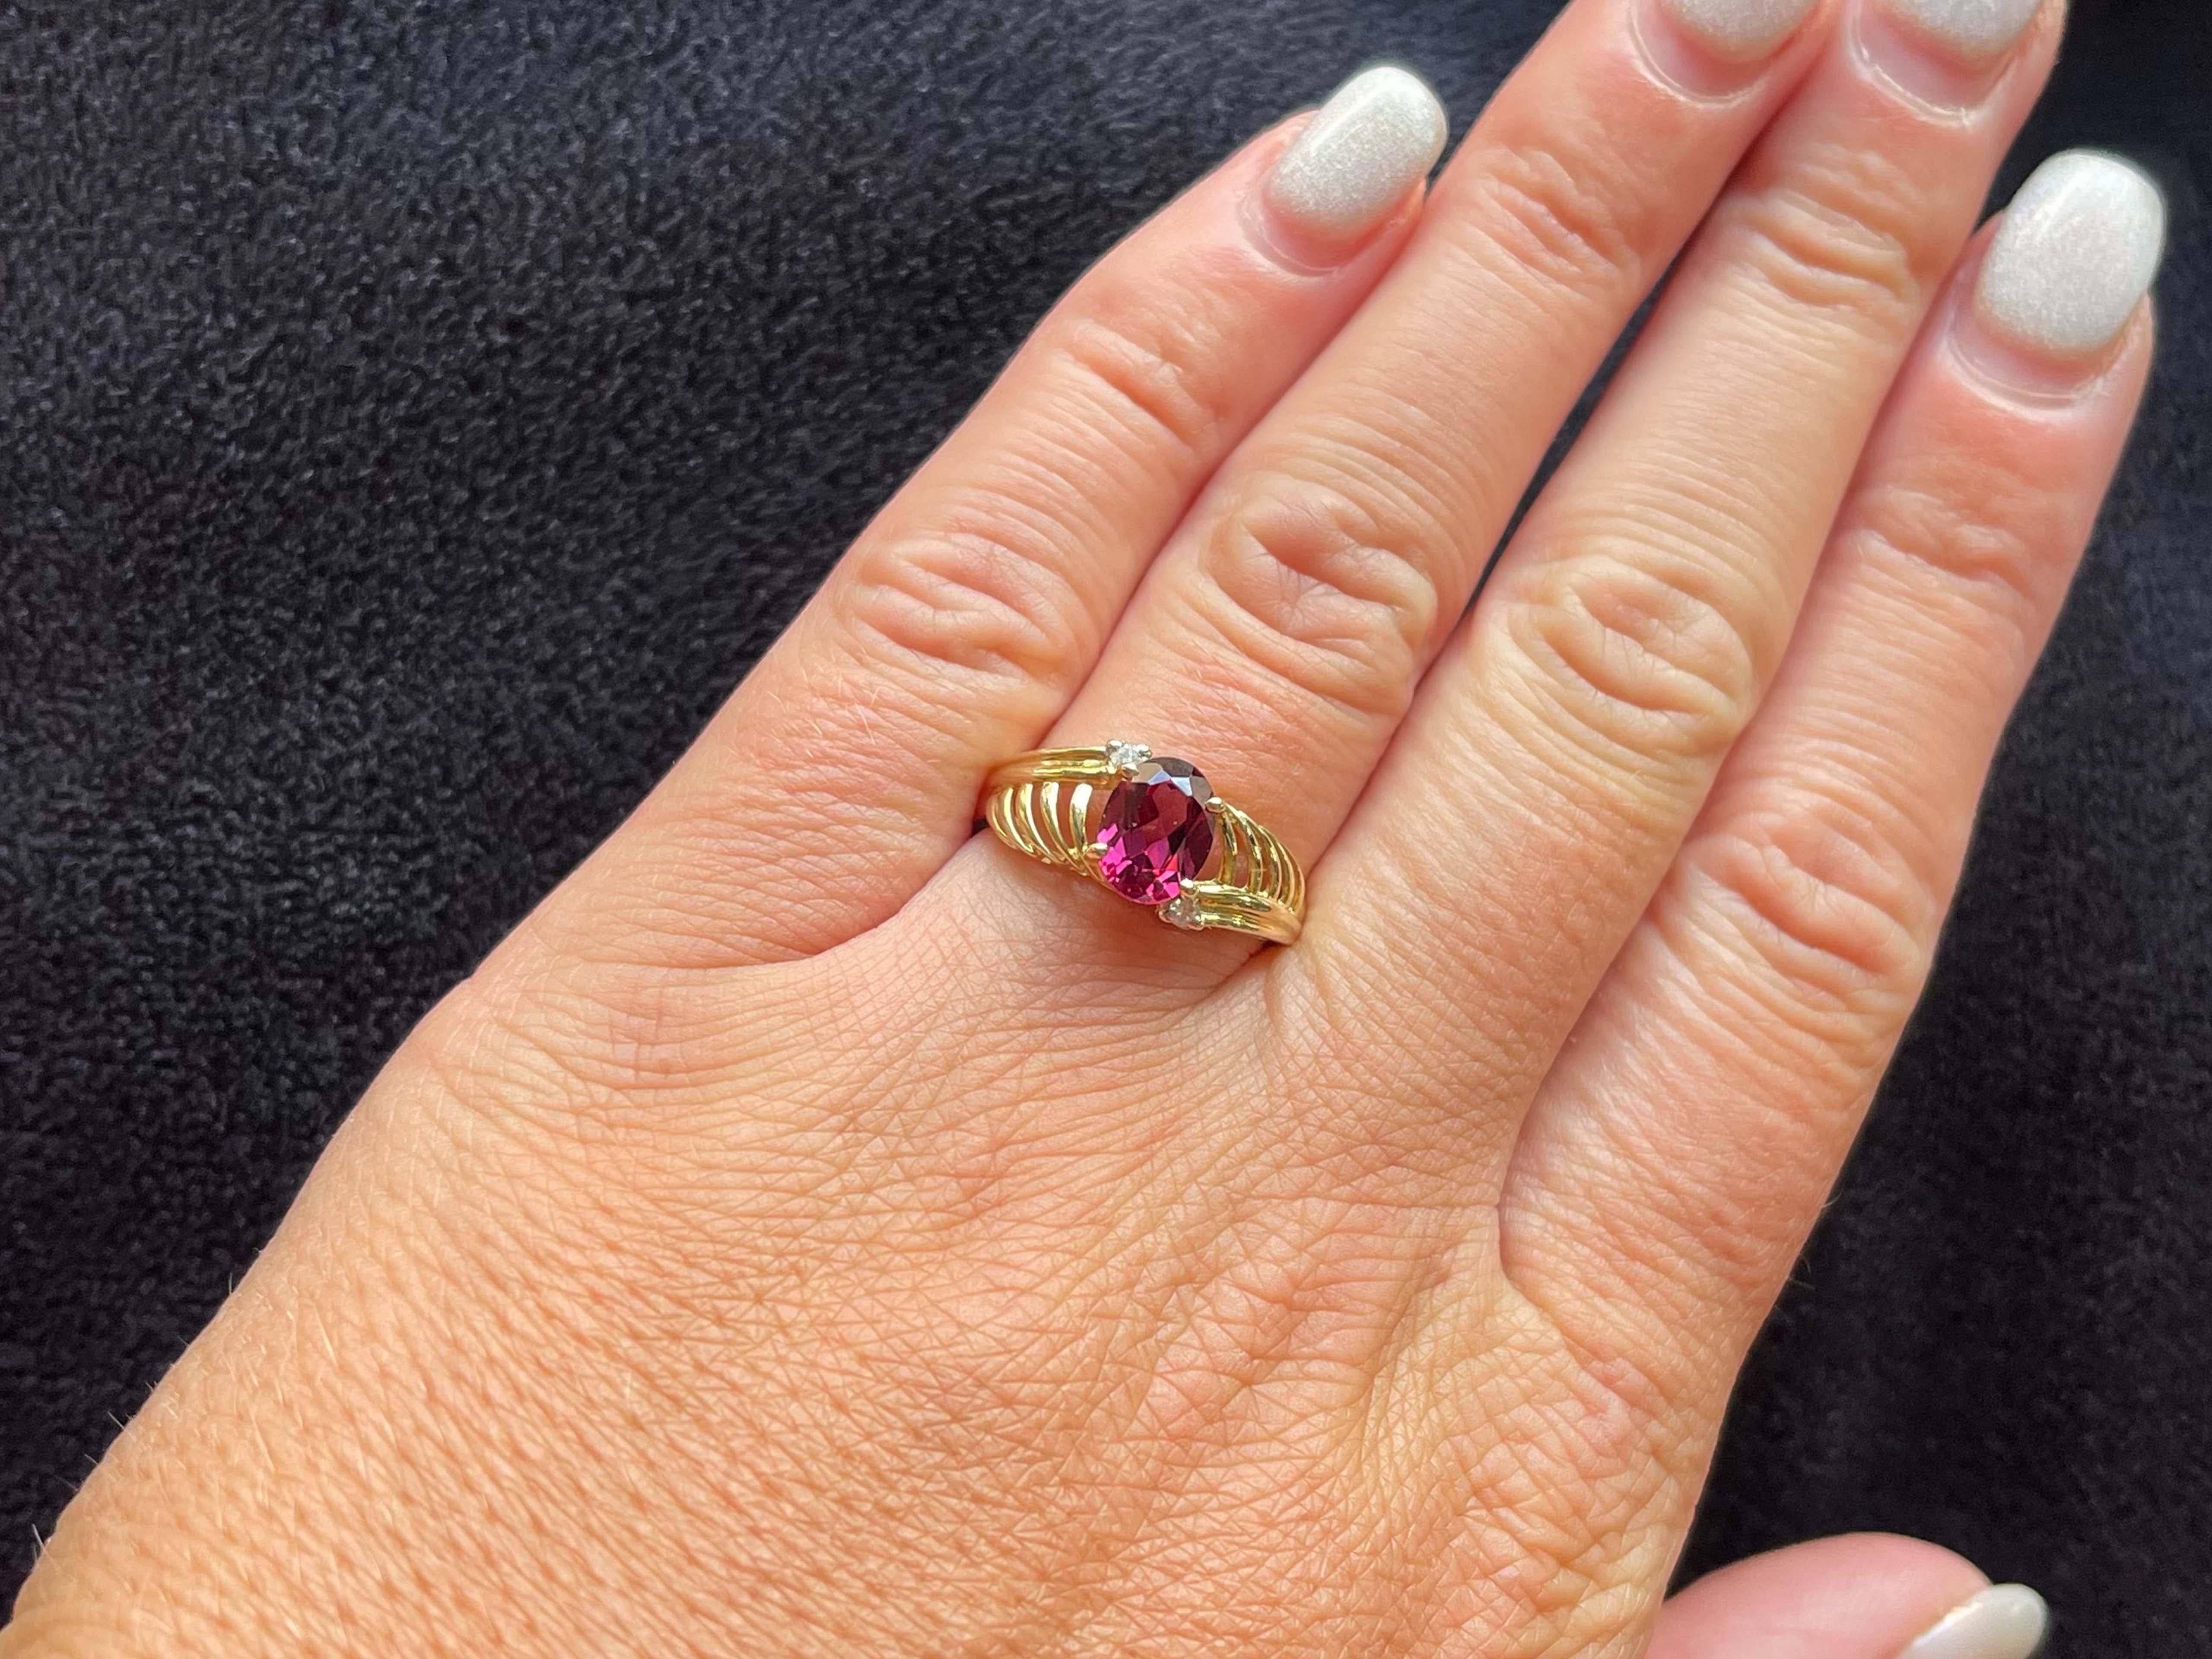 Item Specifications:

Metal: 14K Yellow Gold

Style: Statement Ring

Ring Size: 7.25 (resizing available for a fee)

Ring Height: 8.6 mm tall

Total Weight: 2.9 Grams

Gemstone Specifications:

Gemstones: 1 red rubellite garnet

Garnet Carat Weight: